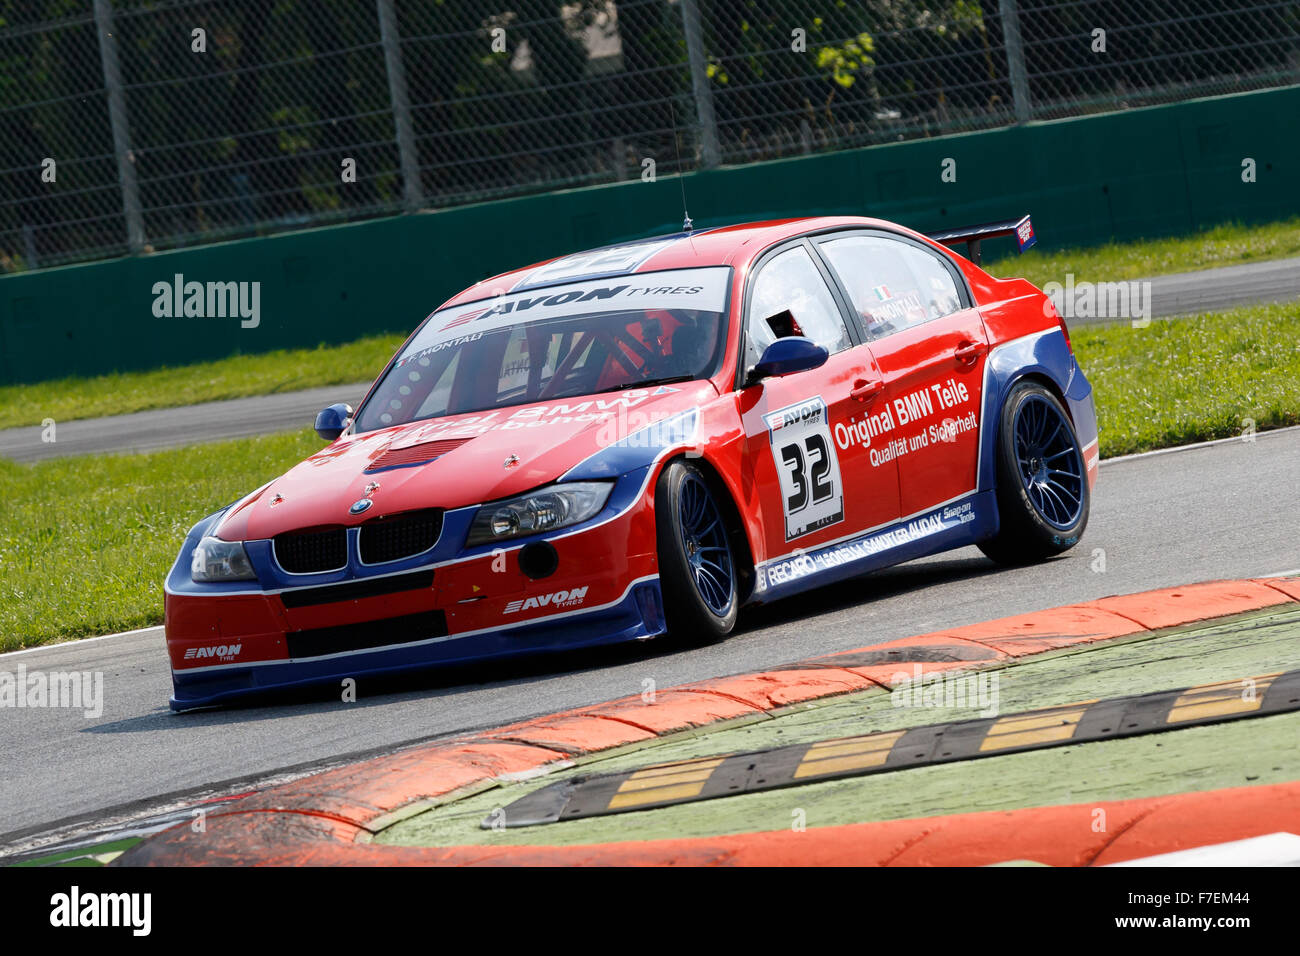 Monza, Italy - May 30, 2015: Bmw E90 of Hexagon Moto team, driven  by MONTALI Fabrizio during the C.I. Turismo Endurance - Race  Stock Photo